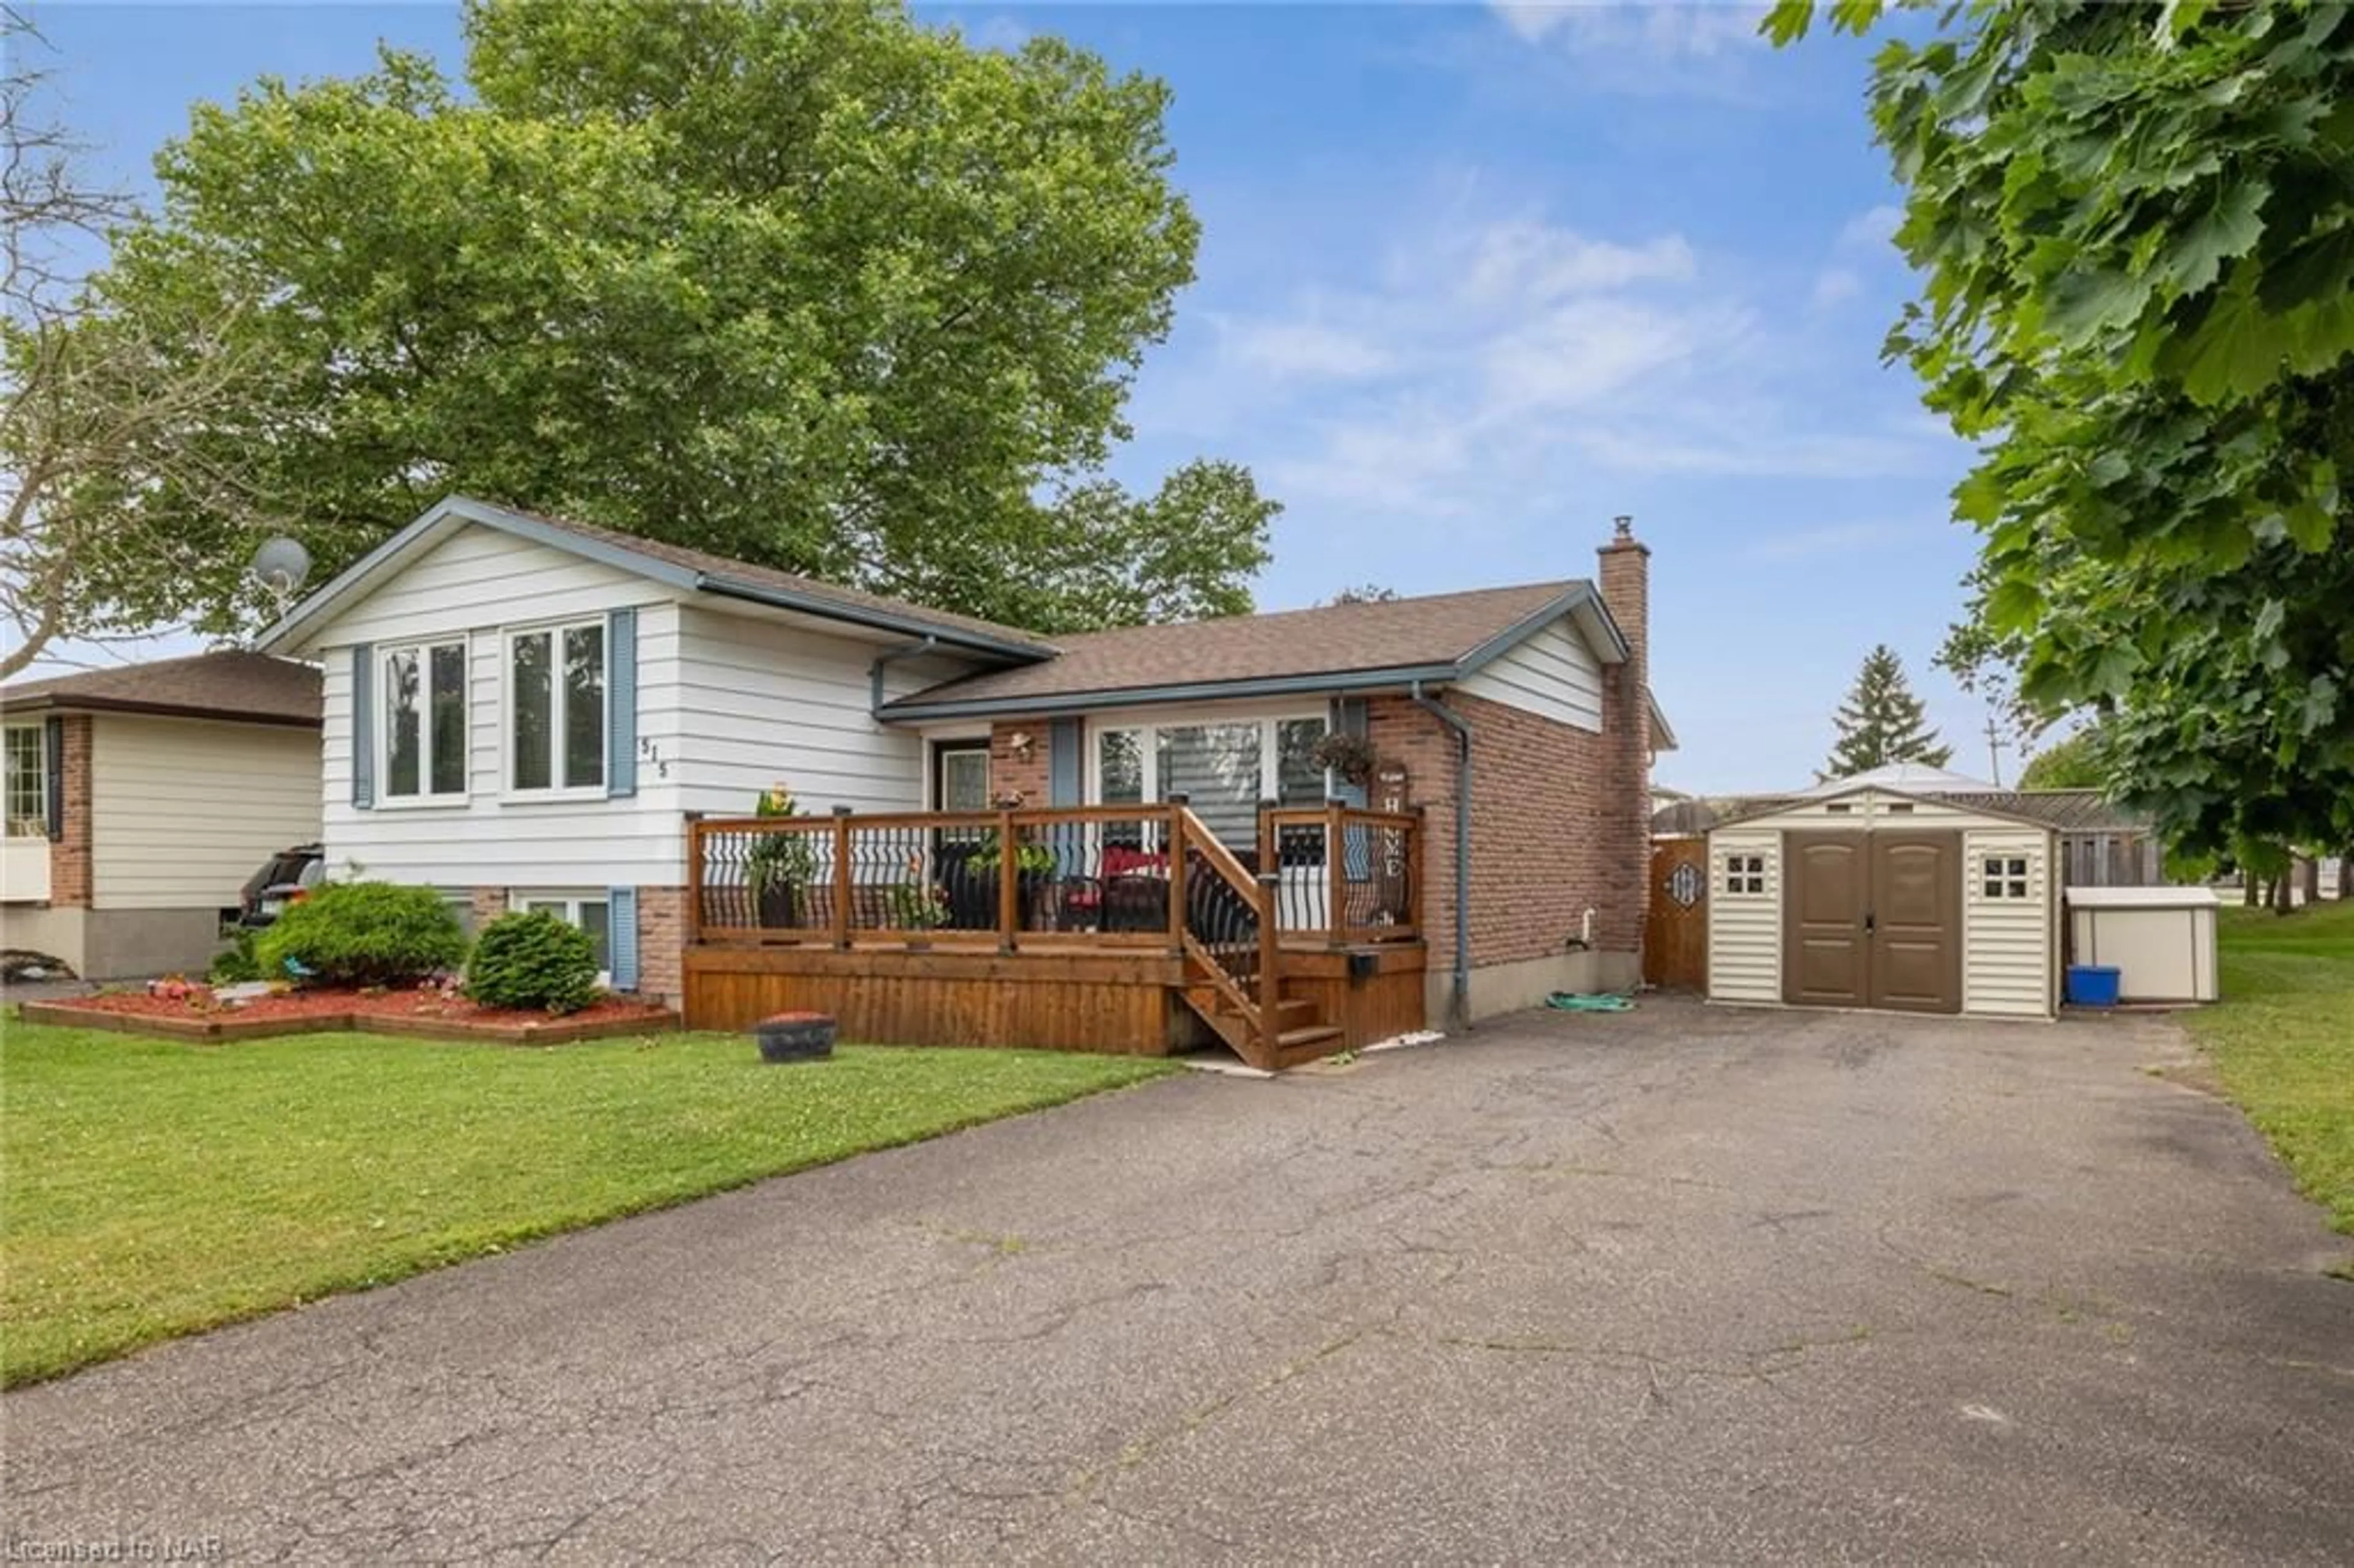 Frontside or backside of a home for 515 Grantham Ave, St. Catharines Ontario L2M 6W2